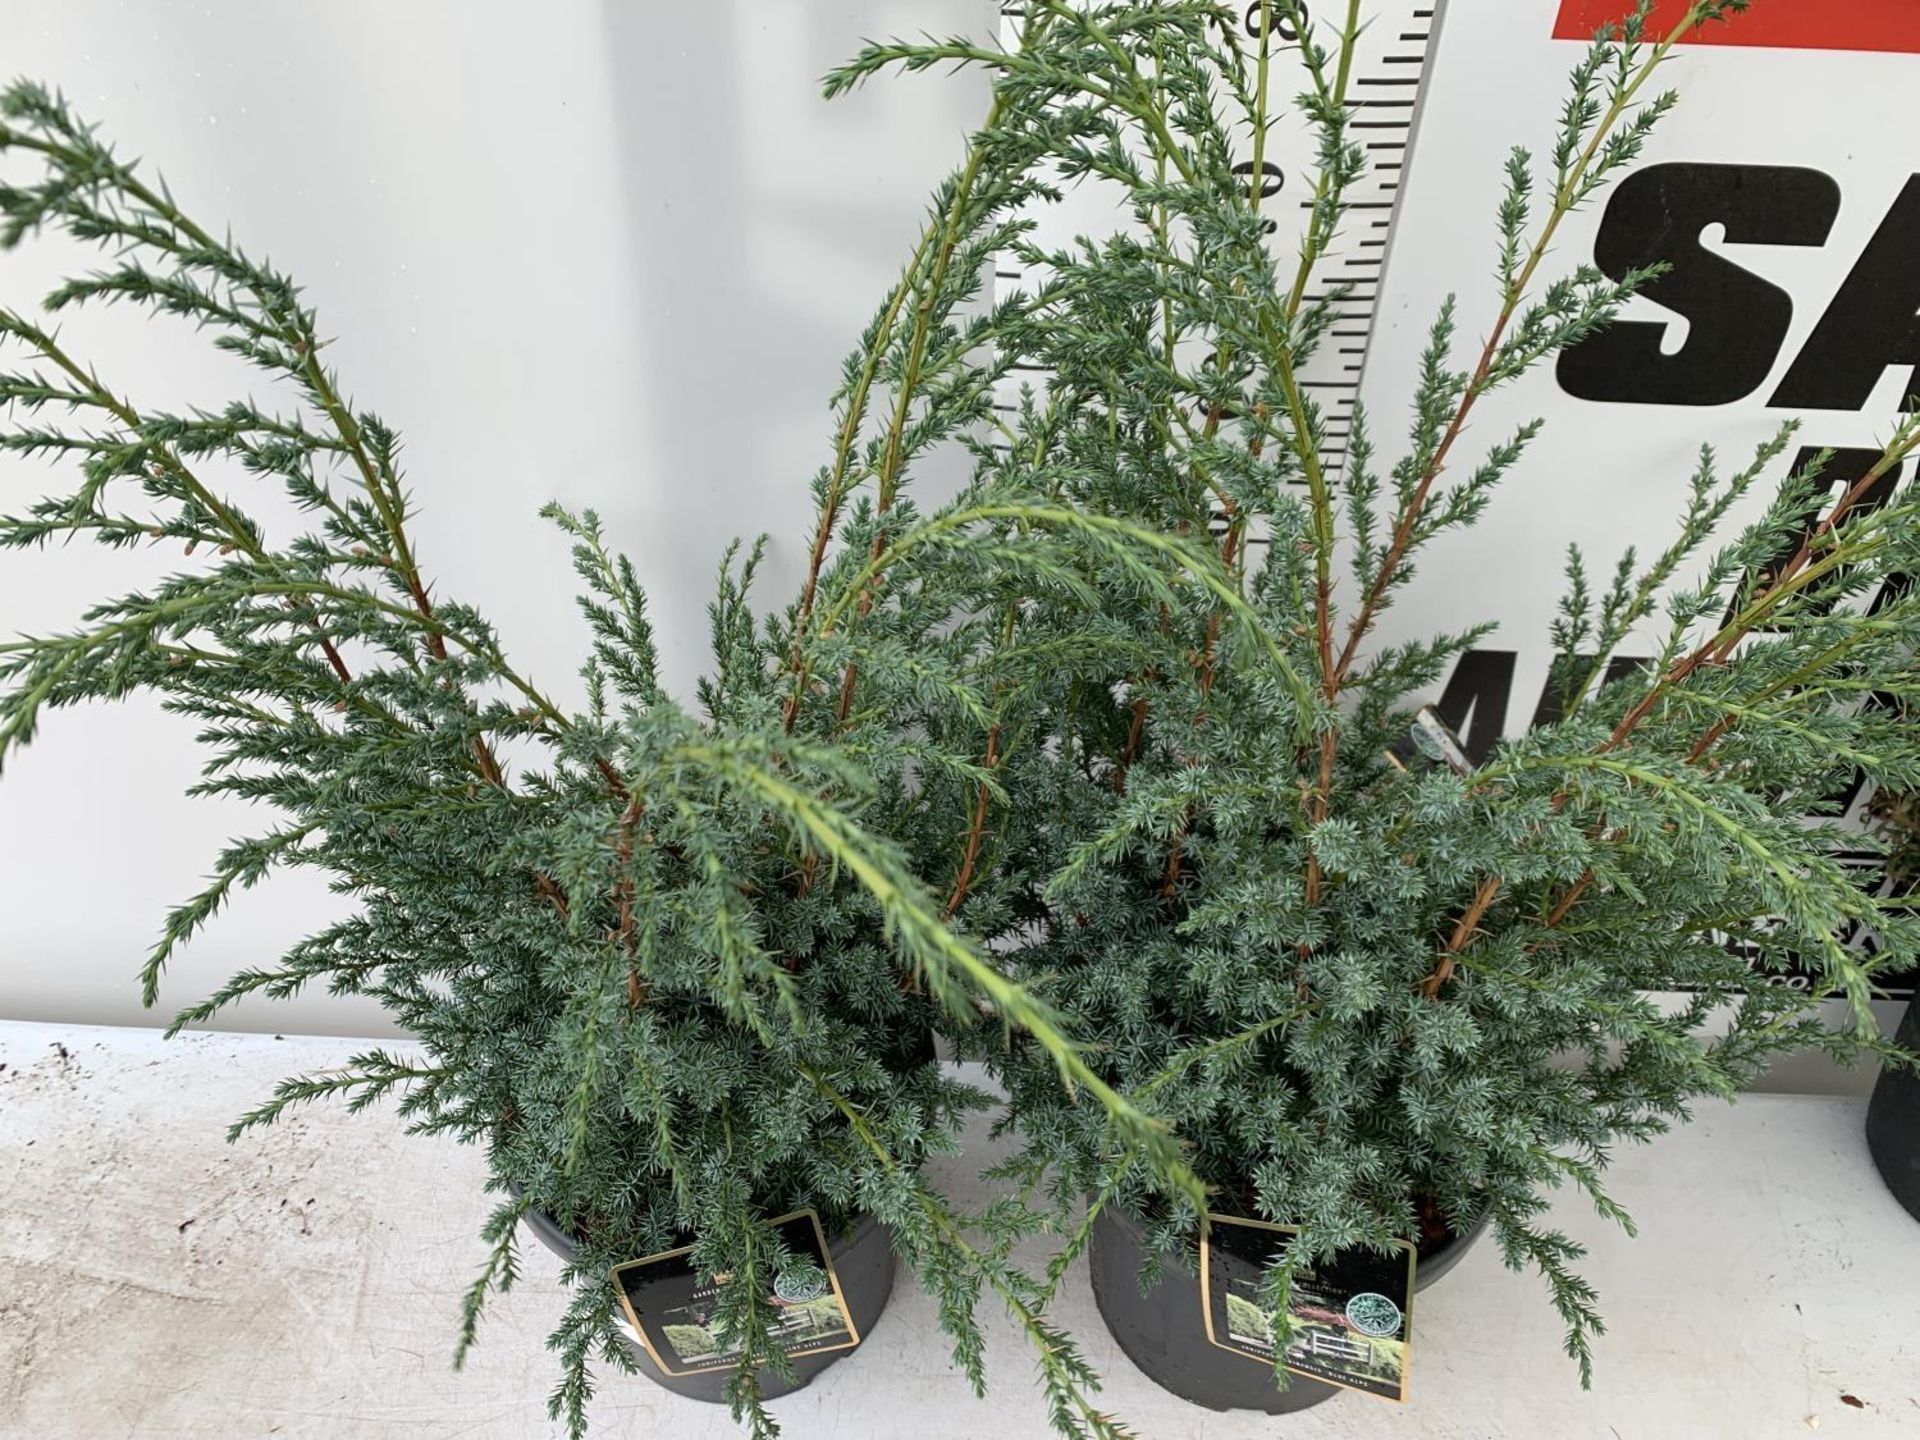 TWO JUNIPERUS CHINENSIS BLUE ALPS IN 7 LTR POTS A METRE IN HEIGHT PLUS VAT TO BE SOLD FOR THE TWO - Image 7 of 22